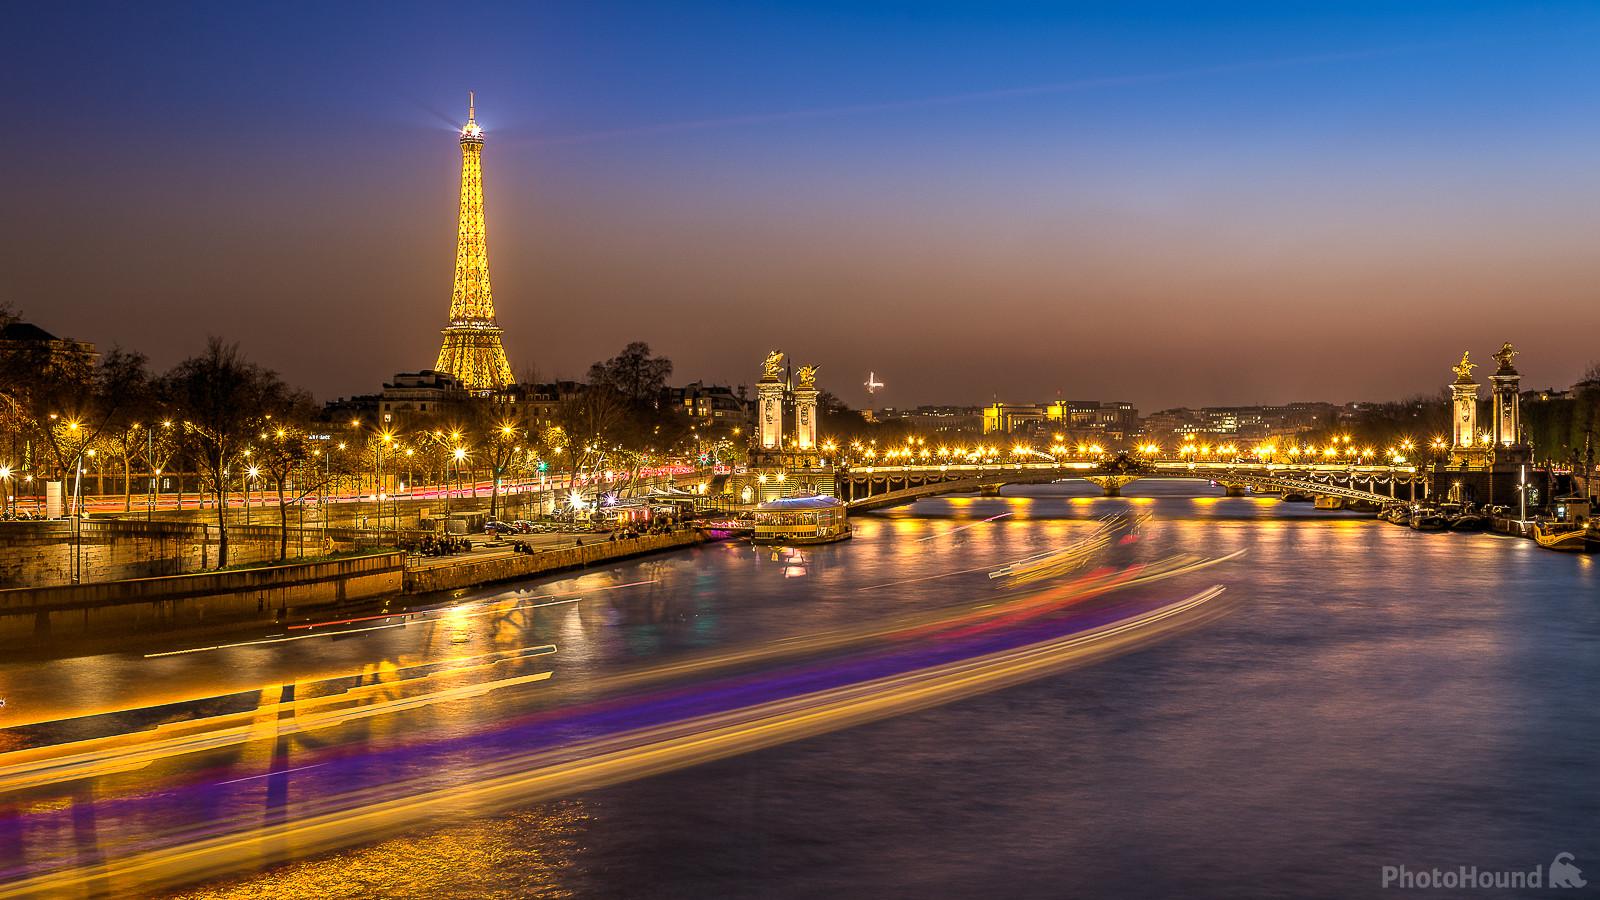 Image of Eiffel Tower and Pont Alexandre III seen from the Pont de la Concorde by Frédéric Monin